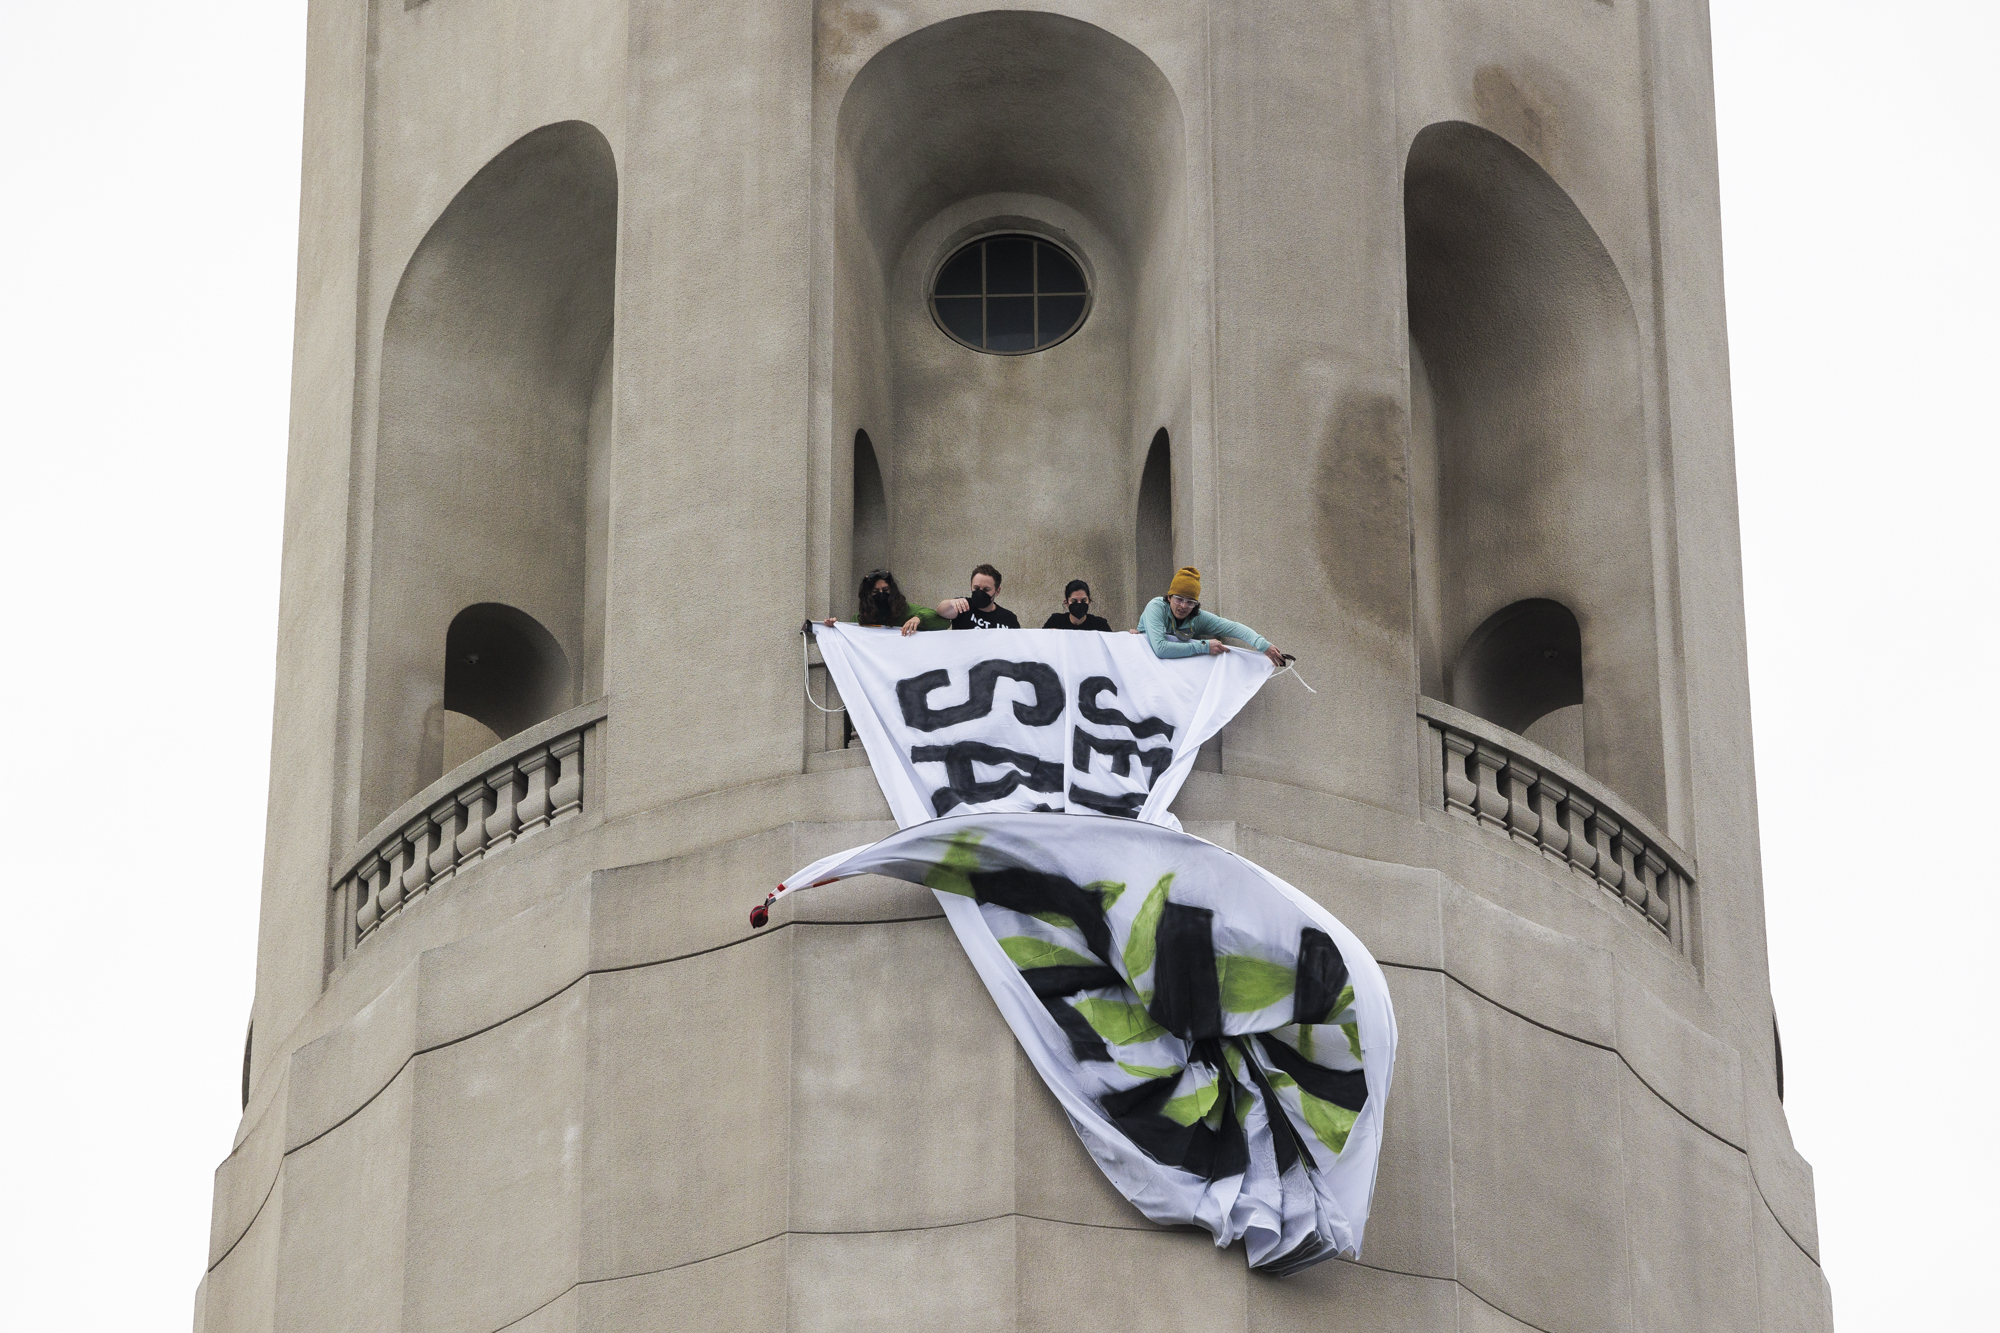 Protesters on a tower unfurling a banner.